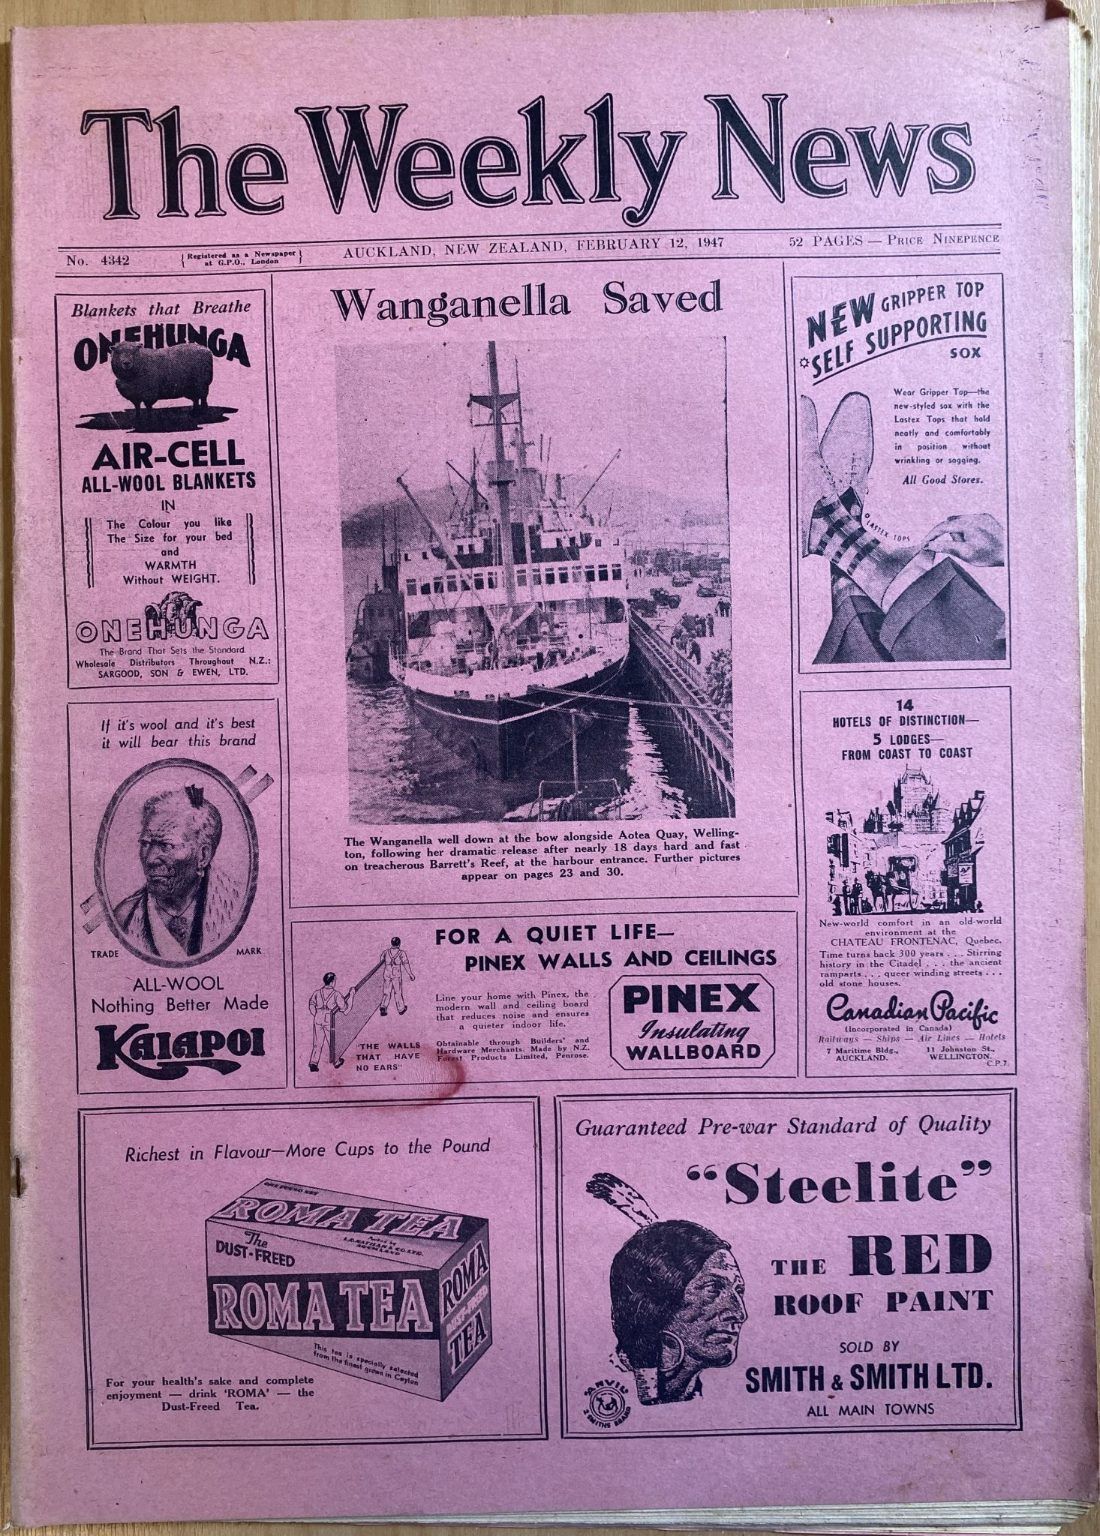 OLD NEWSPAPER: The Weekly News, No. 4342, 12 February 1947